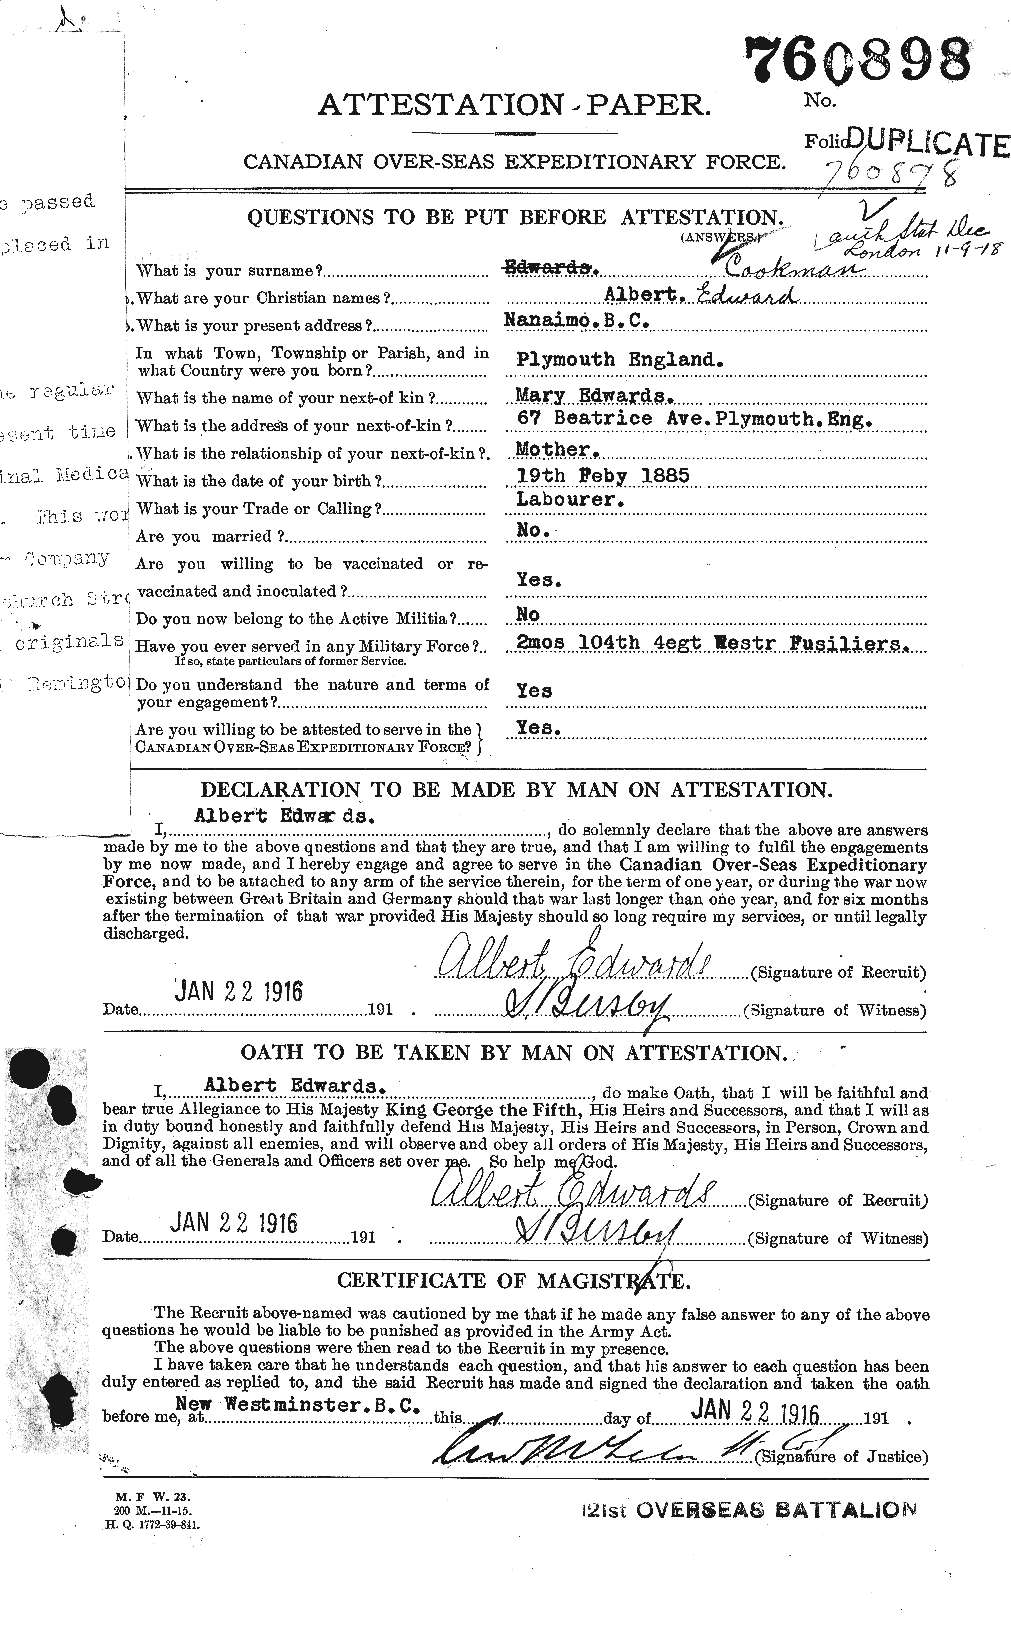 Personnel Records of the First World War - CEF 056778a